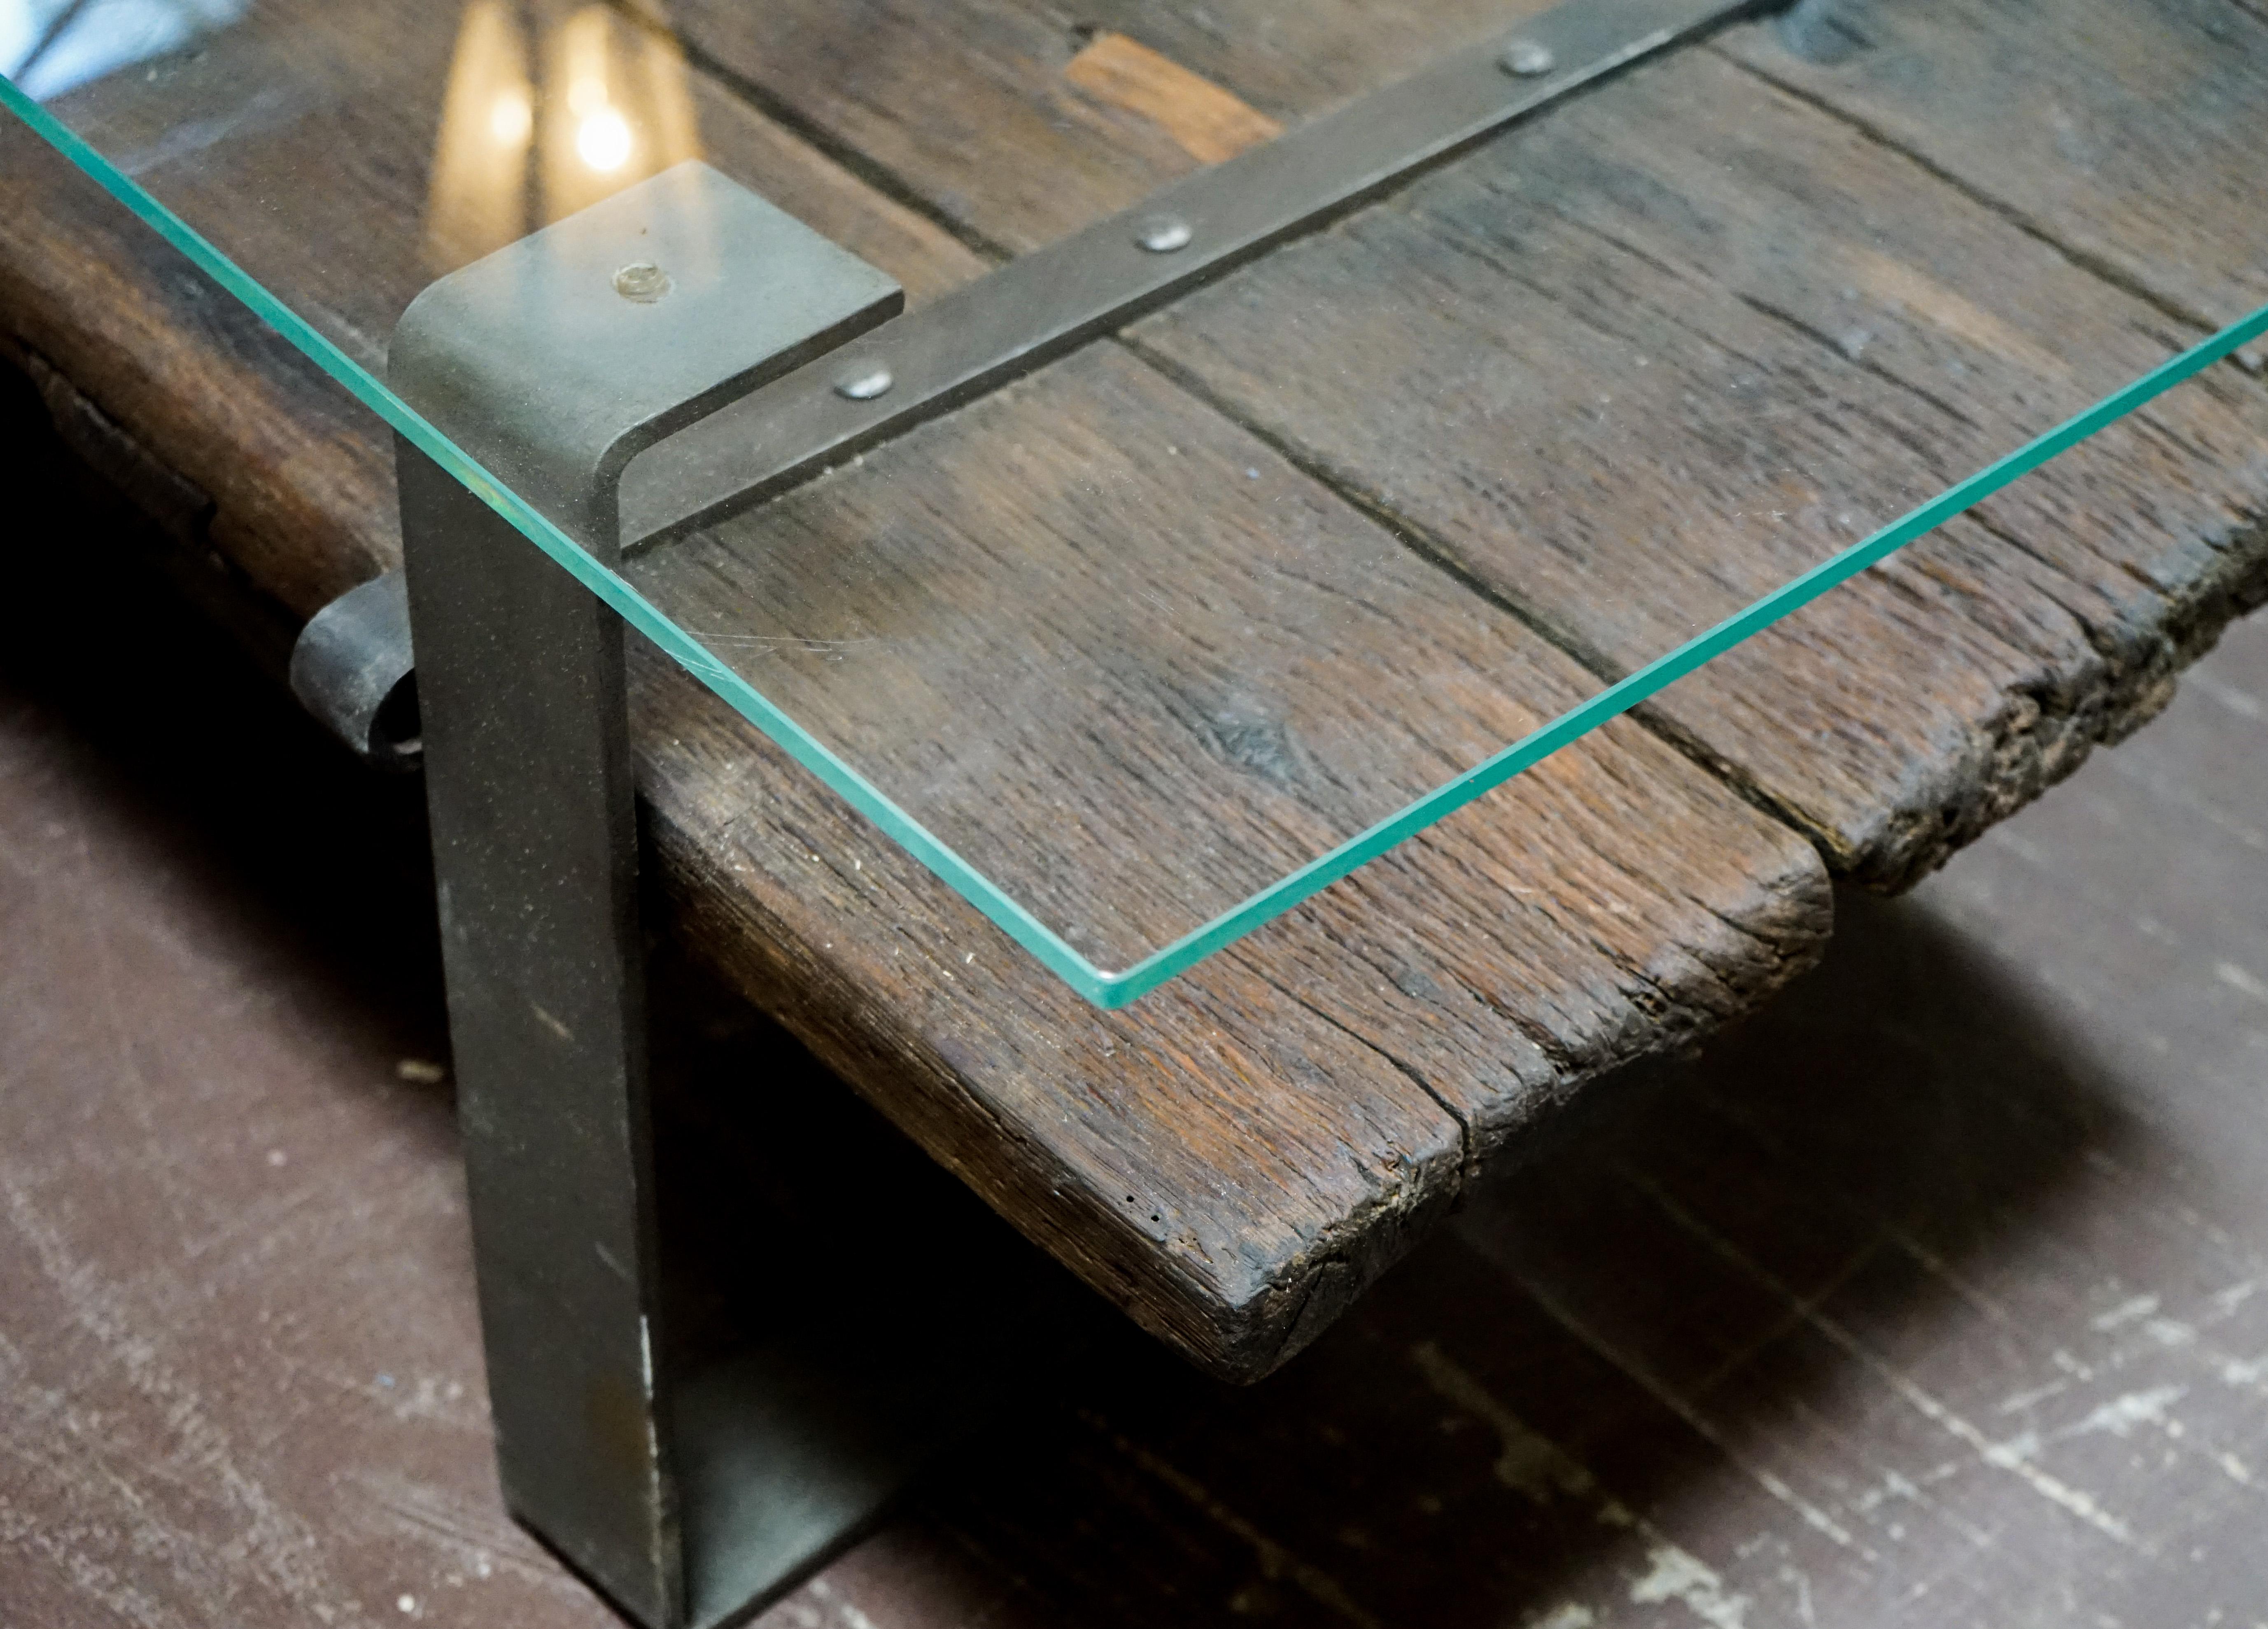 This modern coffee table mixes old and new: an antique door from the 19th century is set to an iron base and shielded with a glass rectangular top. The door acts as a useful shelf for books or items to display, or as a conversation piece of its own.